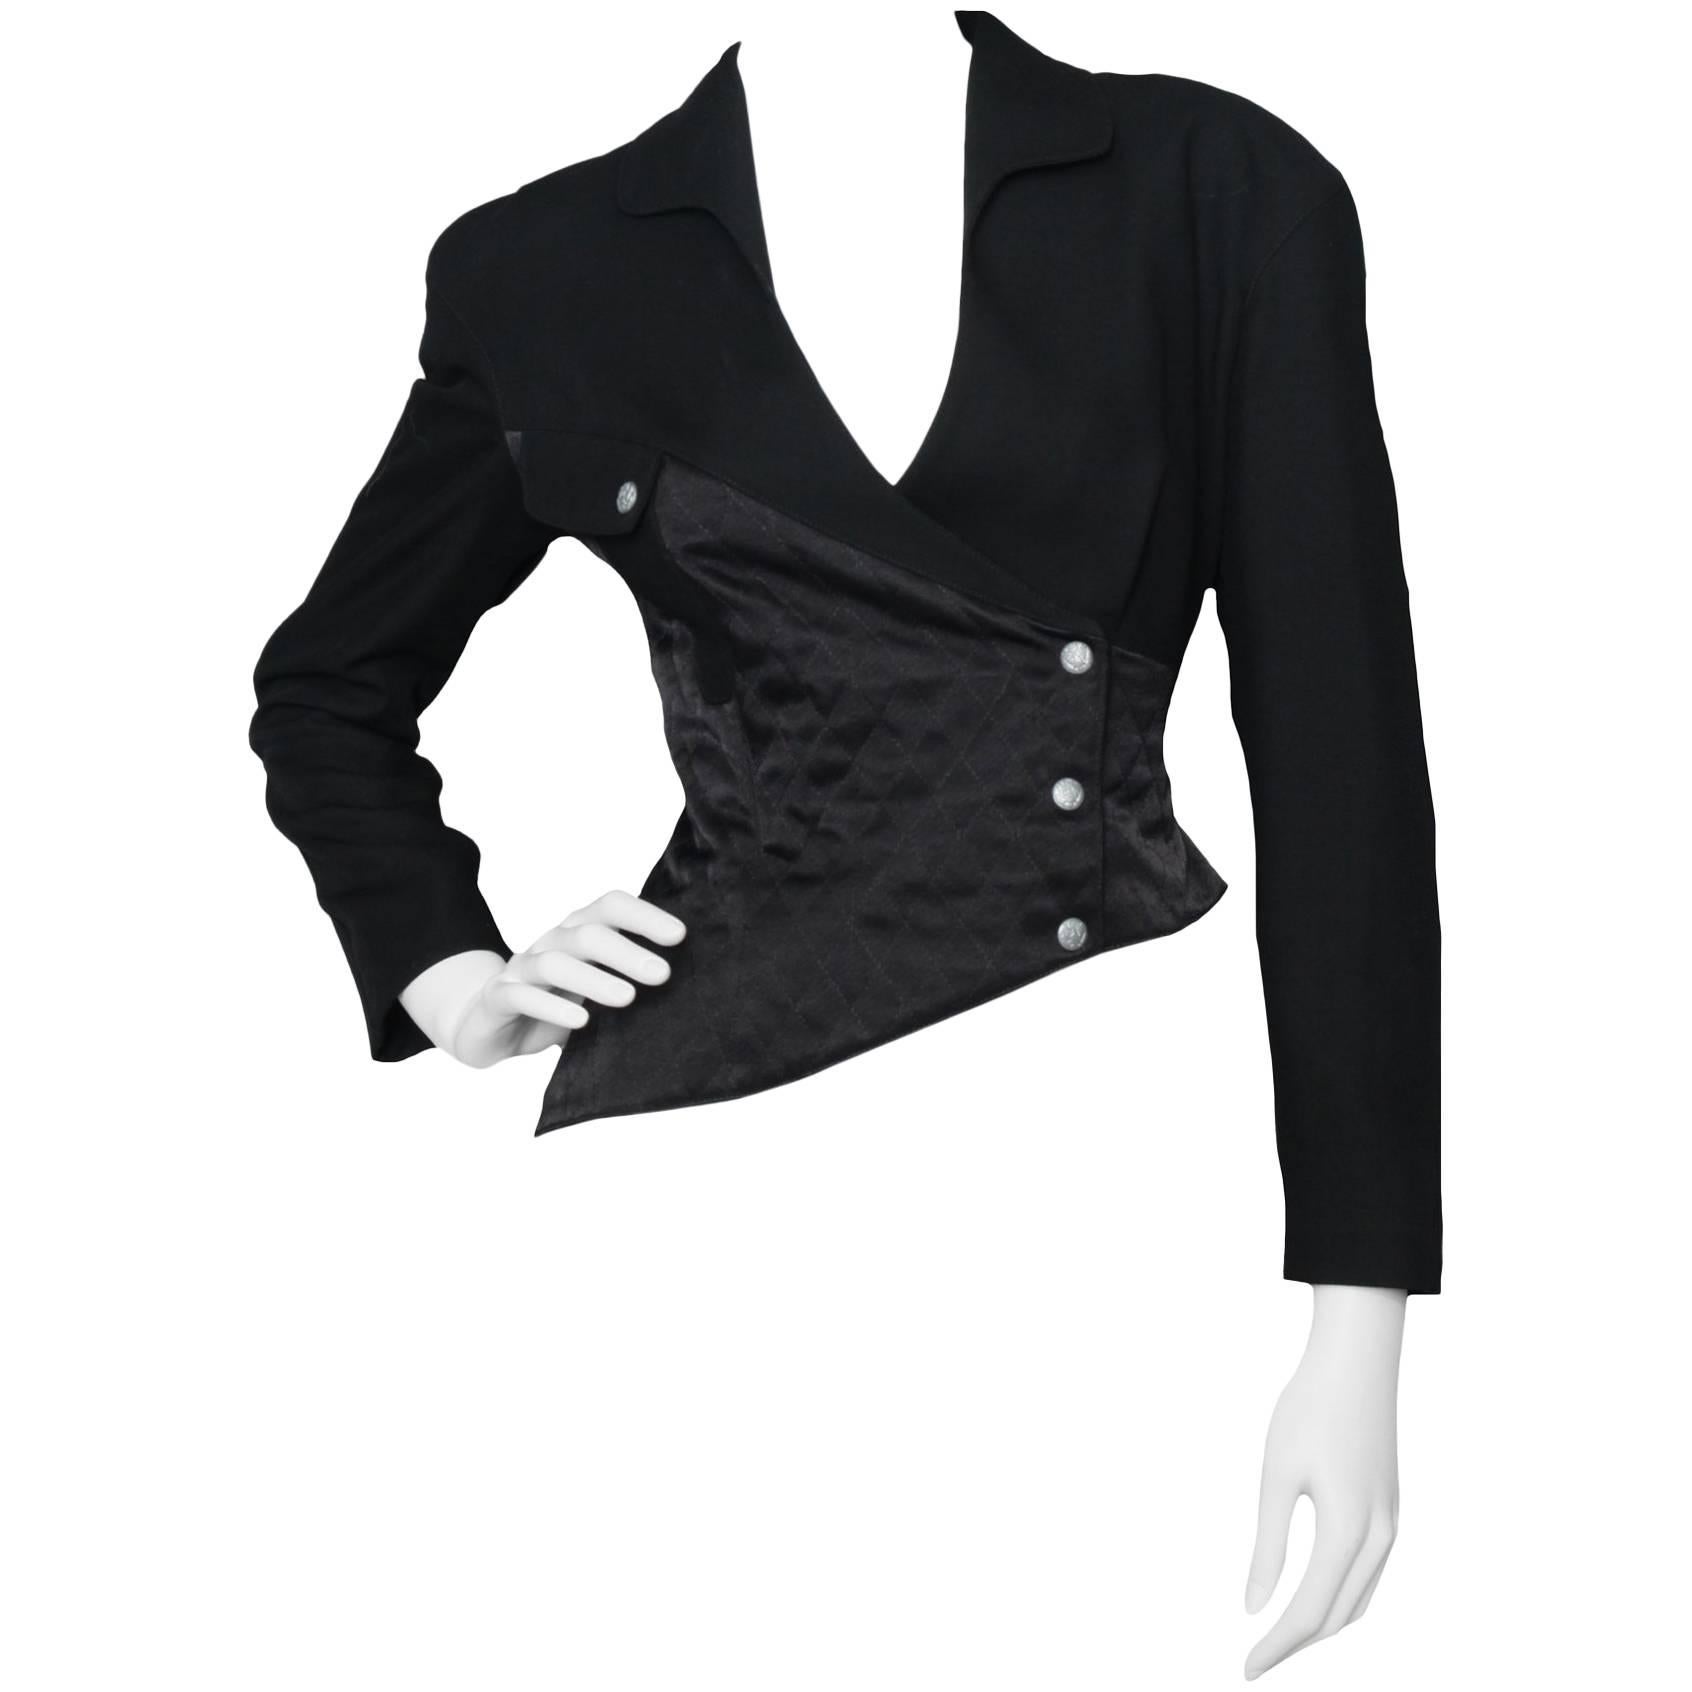 A 1980s Thierry Mugler Cropped Asymmetrical Jacket